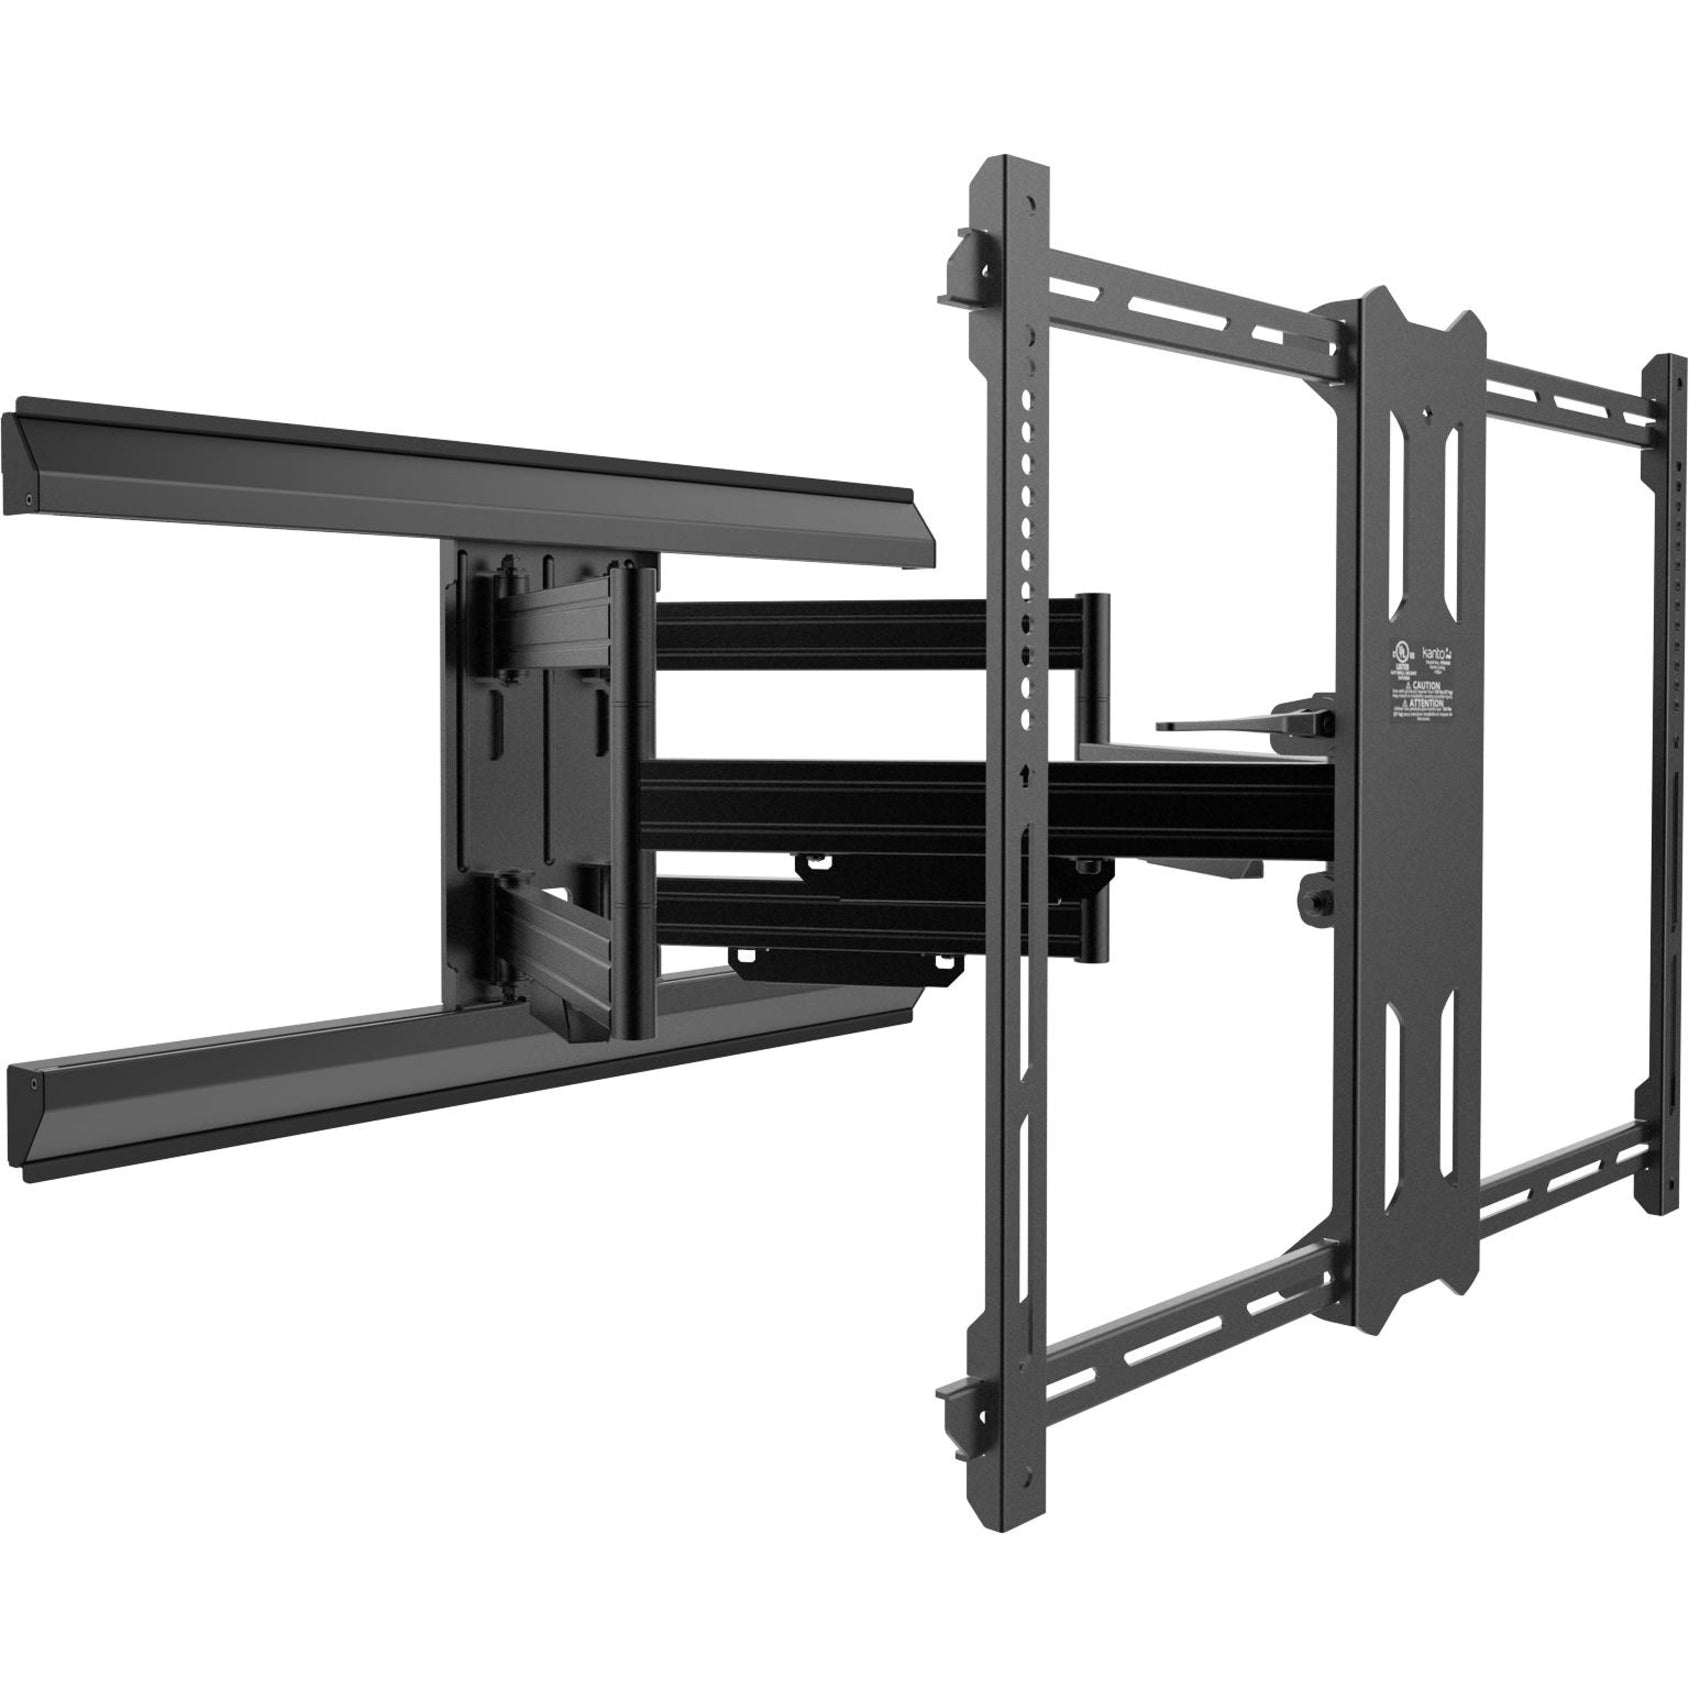 Kanto PMX700 Pro Series Full Motion TV Wall Mount for 42-inch to 100-inch TVs, Retractable, Swivel, Tilt, Full Motion, Articulating, Cable Management, Extendable